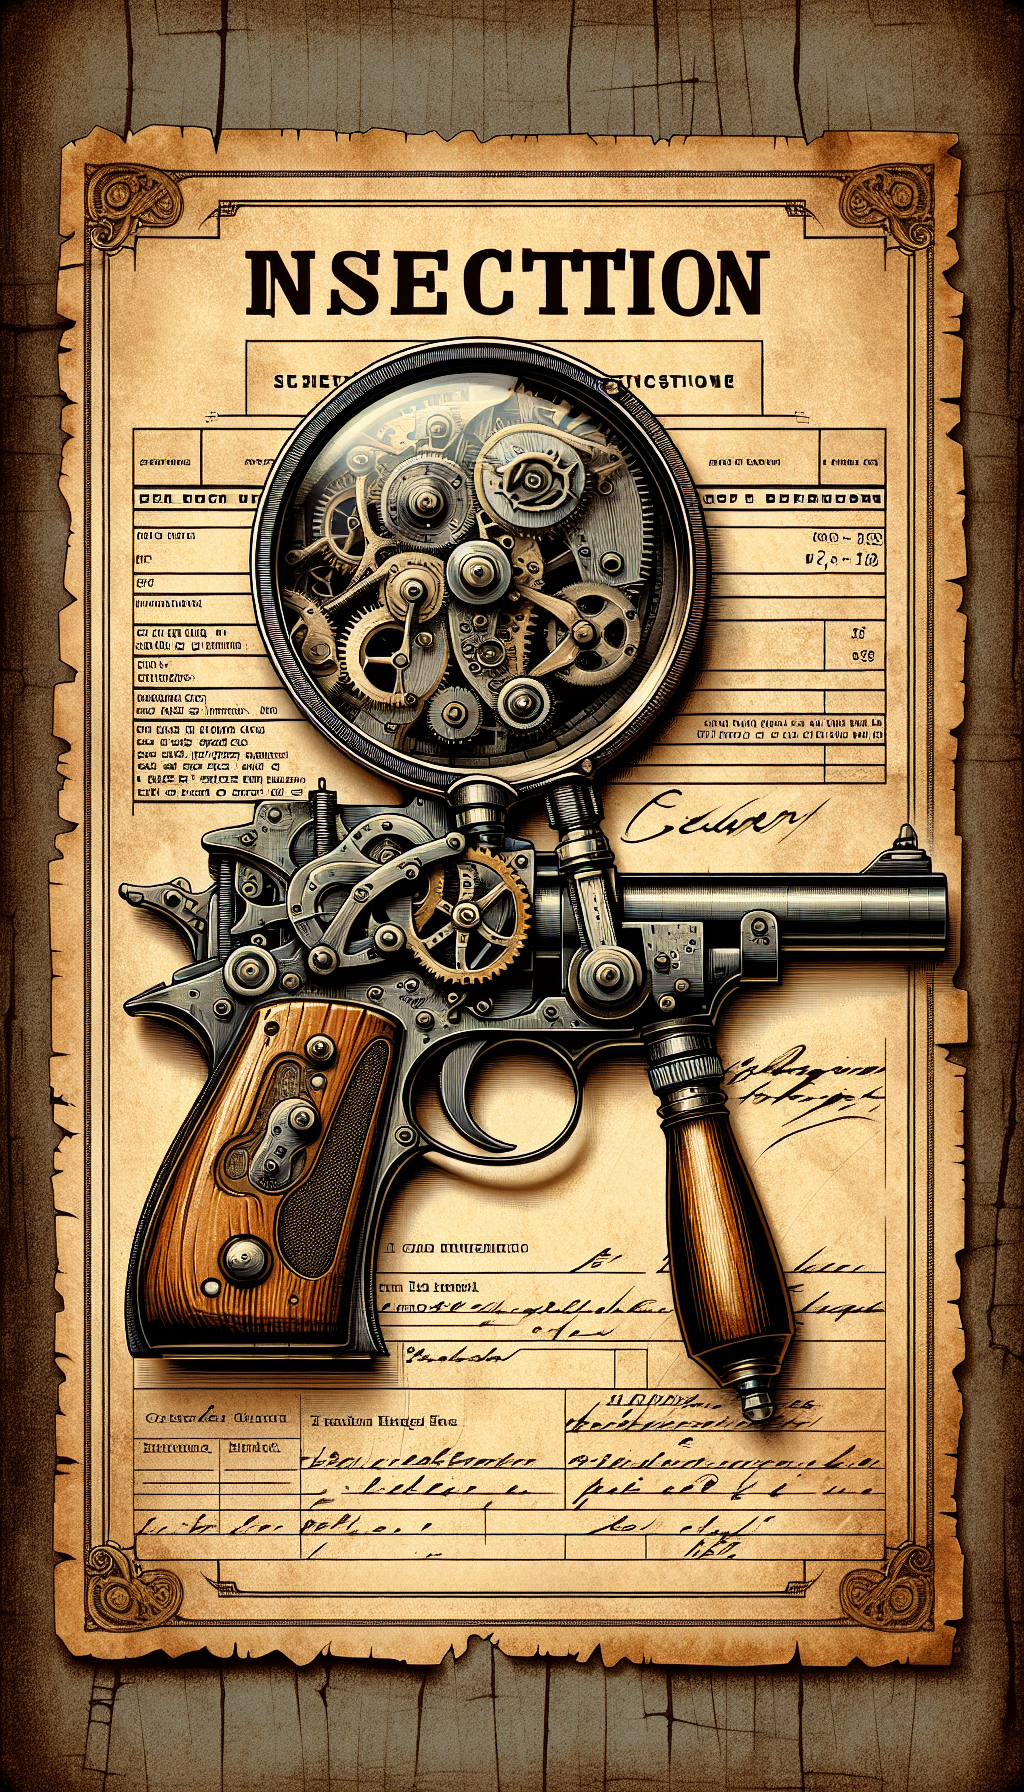 A steampunk-inspired illustration showing a vintage clockwork magnifying glass hovering over an antique gun, with cog and gear mechanisms inside the glass symbolizing the detailed evaluation of the firearm's functionality. The gun rests atop an aging appraisal document with the title of the section stamped in a Victorian font, blending the themes of mechanical intricacy and historical value.